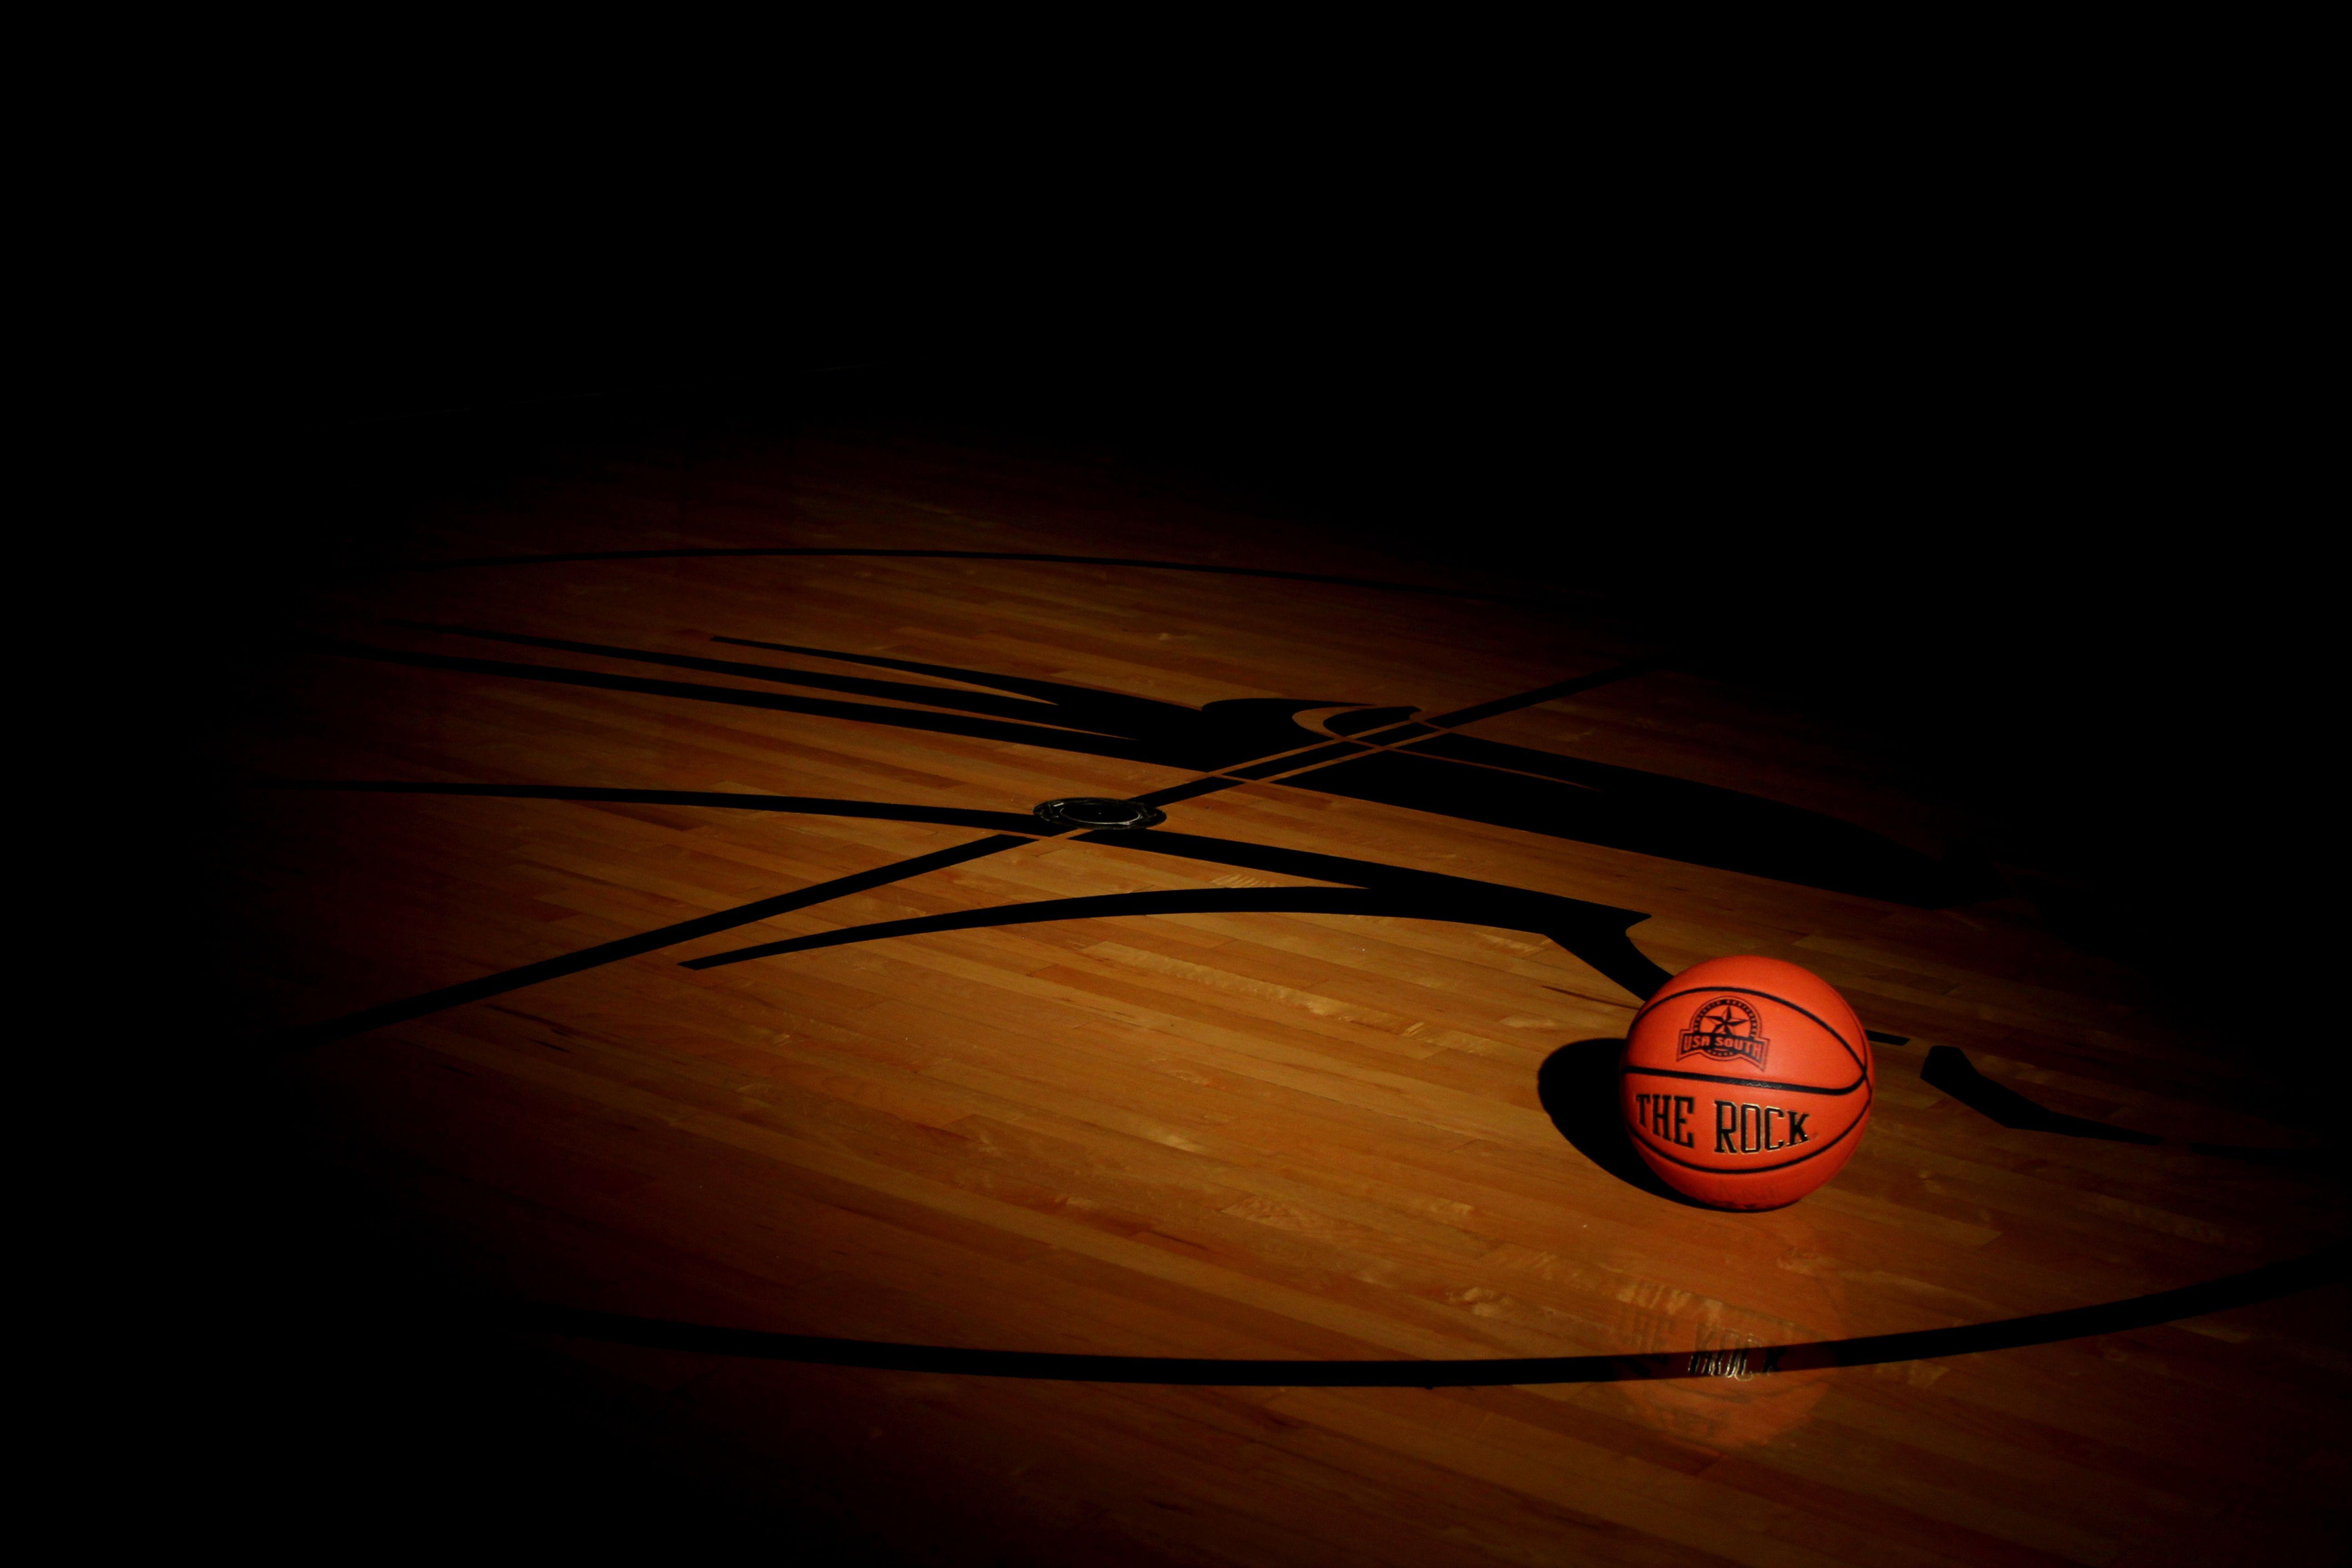 Hd Basketball Court Wallpaper Mobile with HD Wallpaper 5184x3456 px